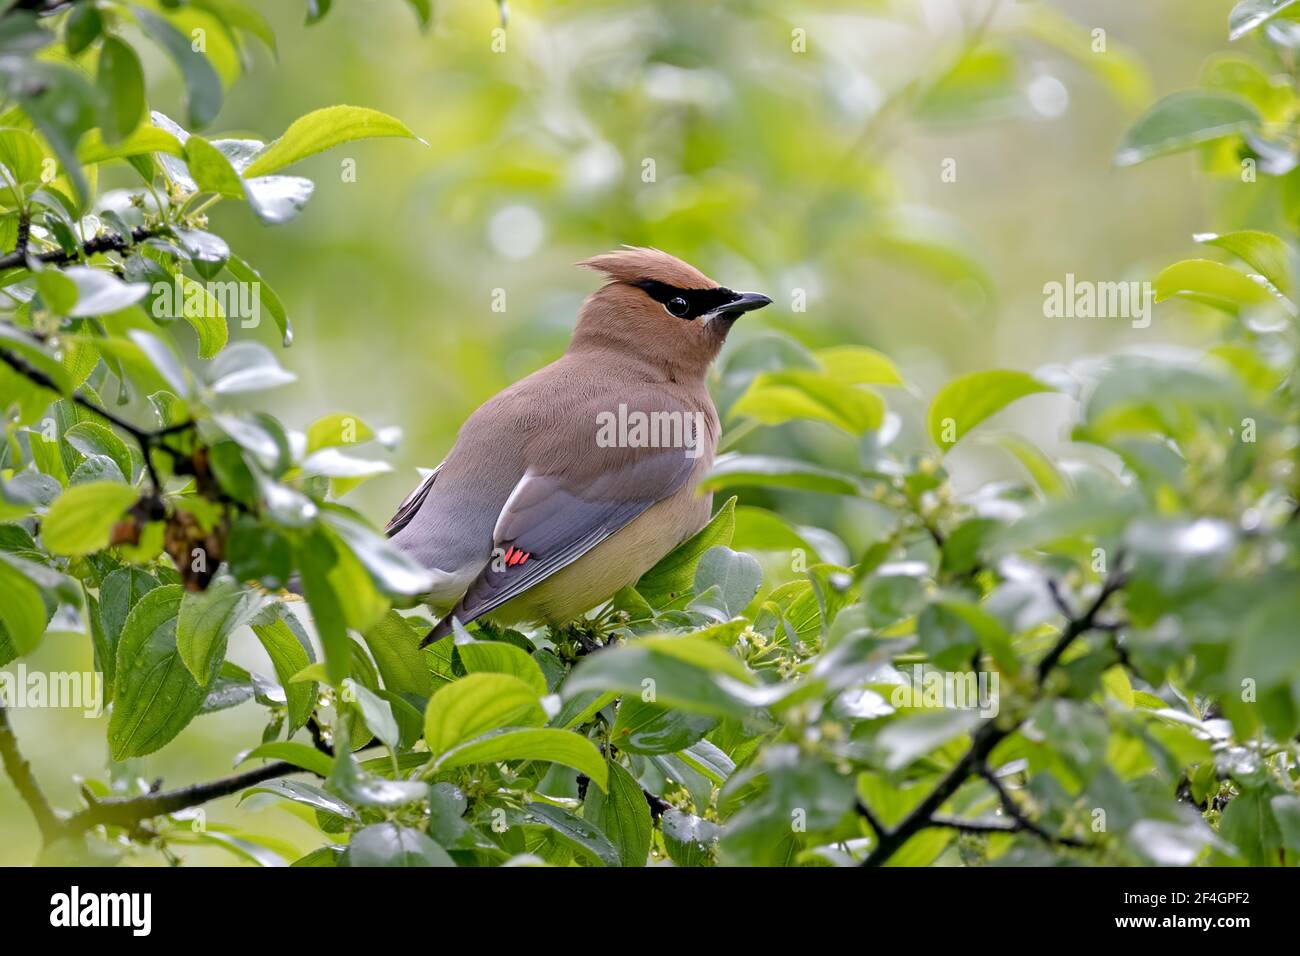 Cedar waxwing perched on a branch of a green leafy bush with a light green background. Late spring in Ottawa, Canada. Stock Photo